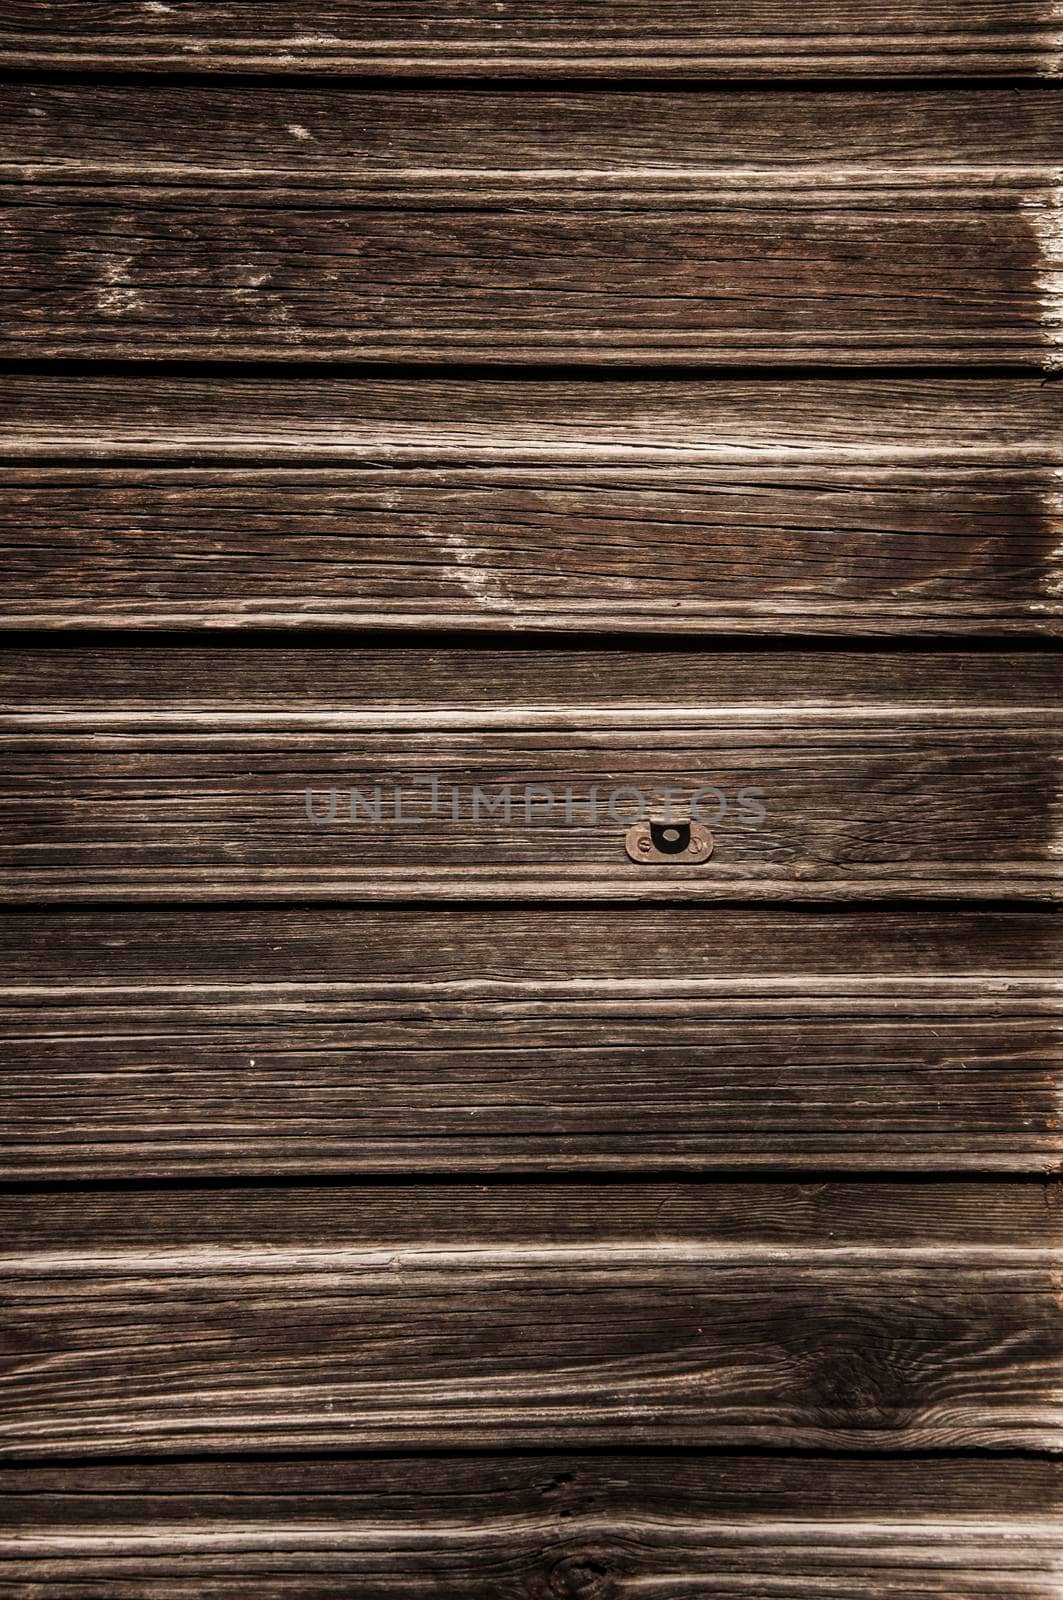 Natural brown barn wood floor / wall texture background pattern. Wood planks / boards are very old with a beautiful rustic look / style.